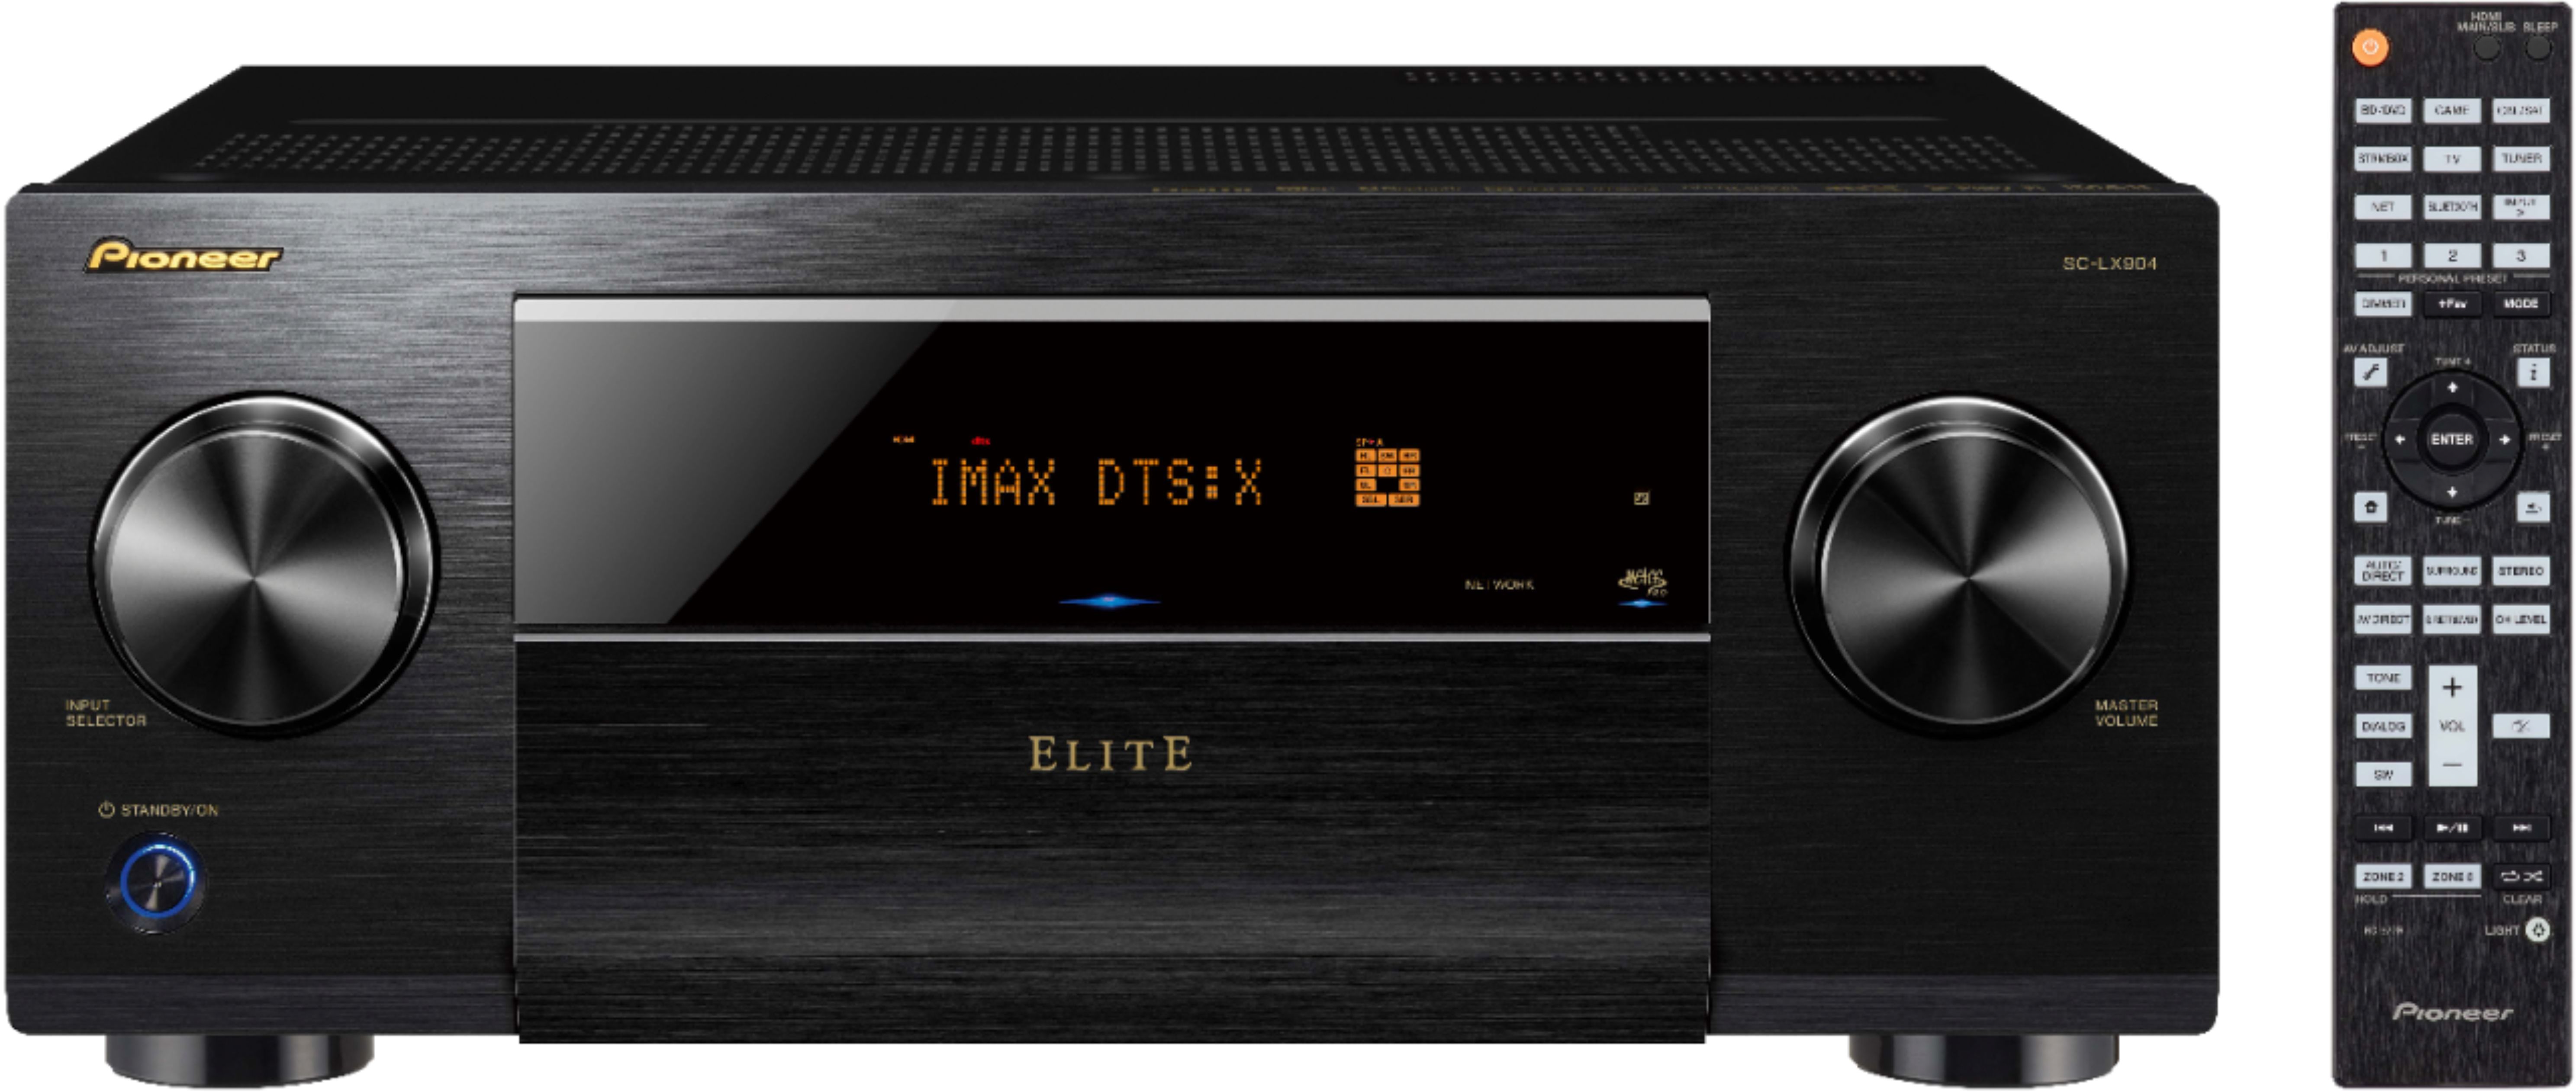 Best Buy: Pioneer Elite 11.2-Ch. Bluetooth Capable with Dolby Atmos 4K Ultra HD Compatible A/V Home Theater Receiver Black SCLX904